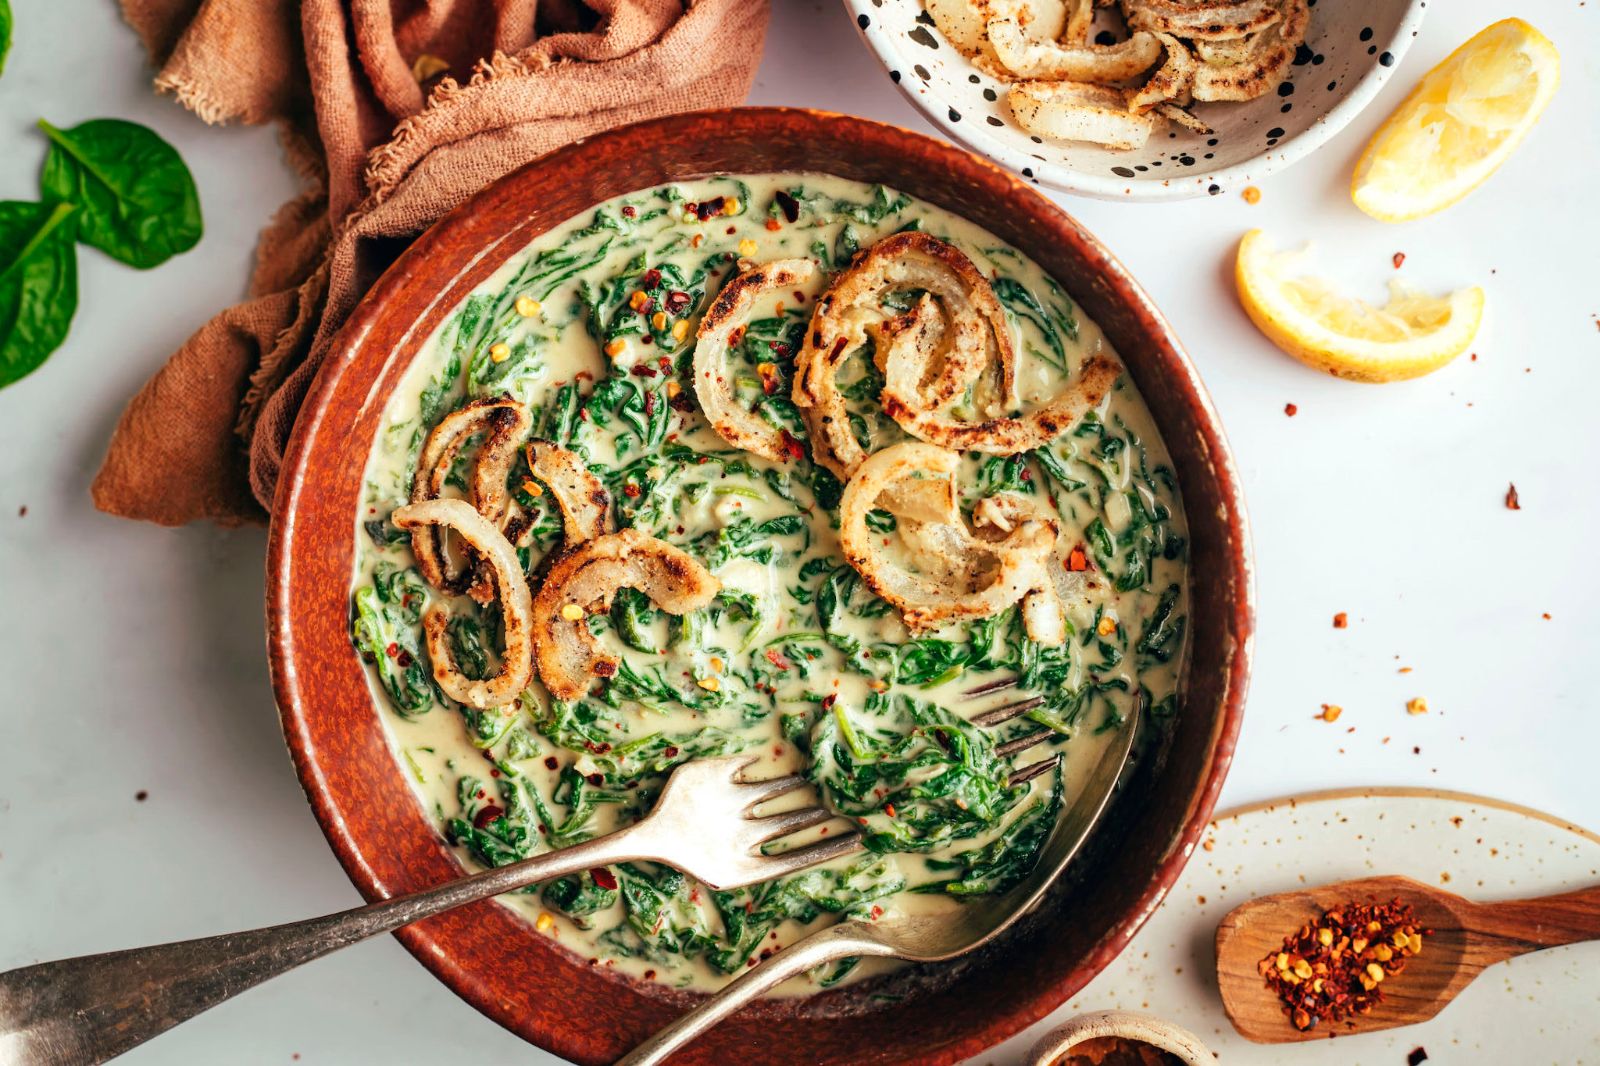 VEGAN-Creamed-Spinach-perfect-for-the-holidays-20-minutes-8-ingredients-SO-satisfying-minimalistbaker-recipe-plantbased-spinach-8-1365x2048.jpg